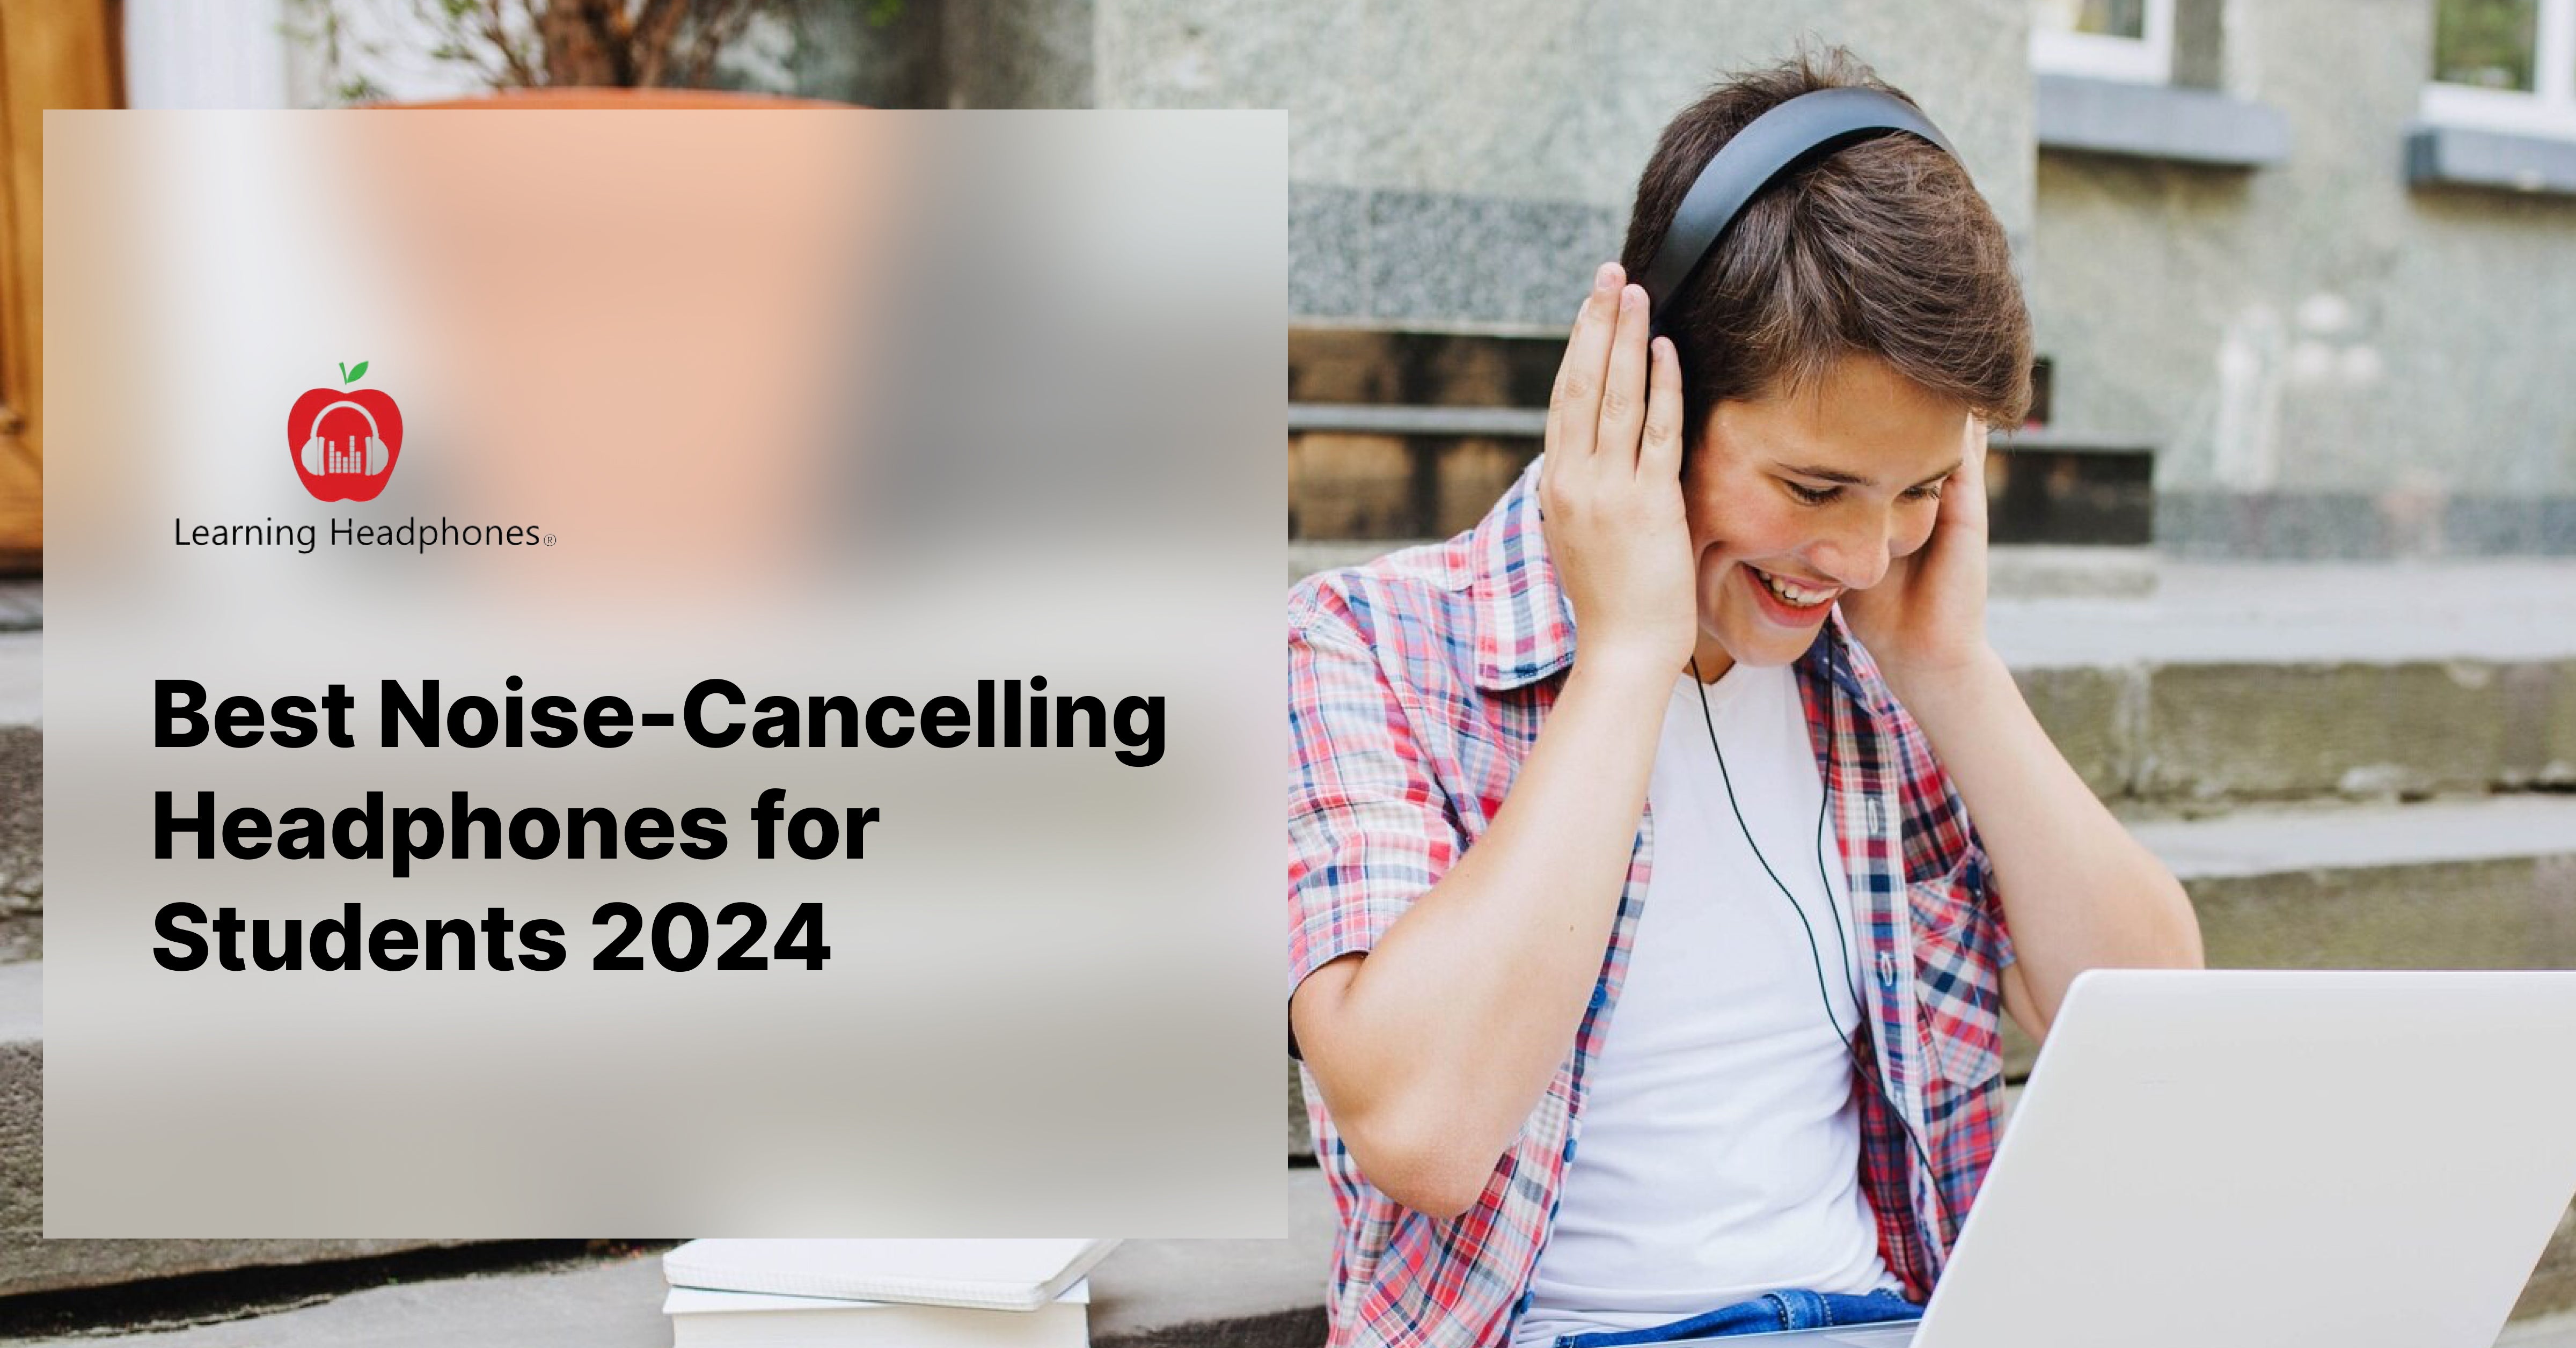 Best Noise-Cancelling Headphones for Students 2024